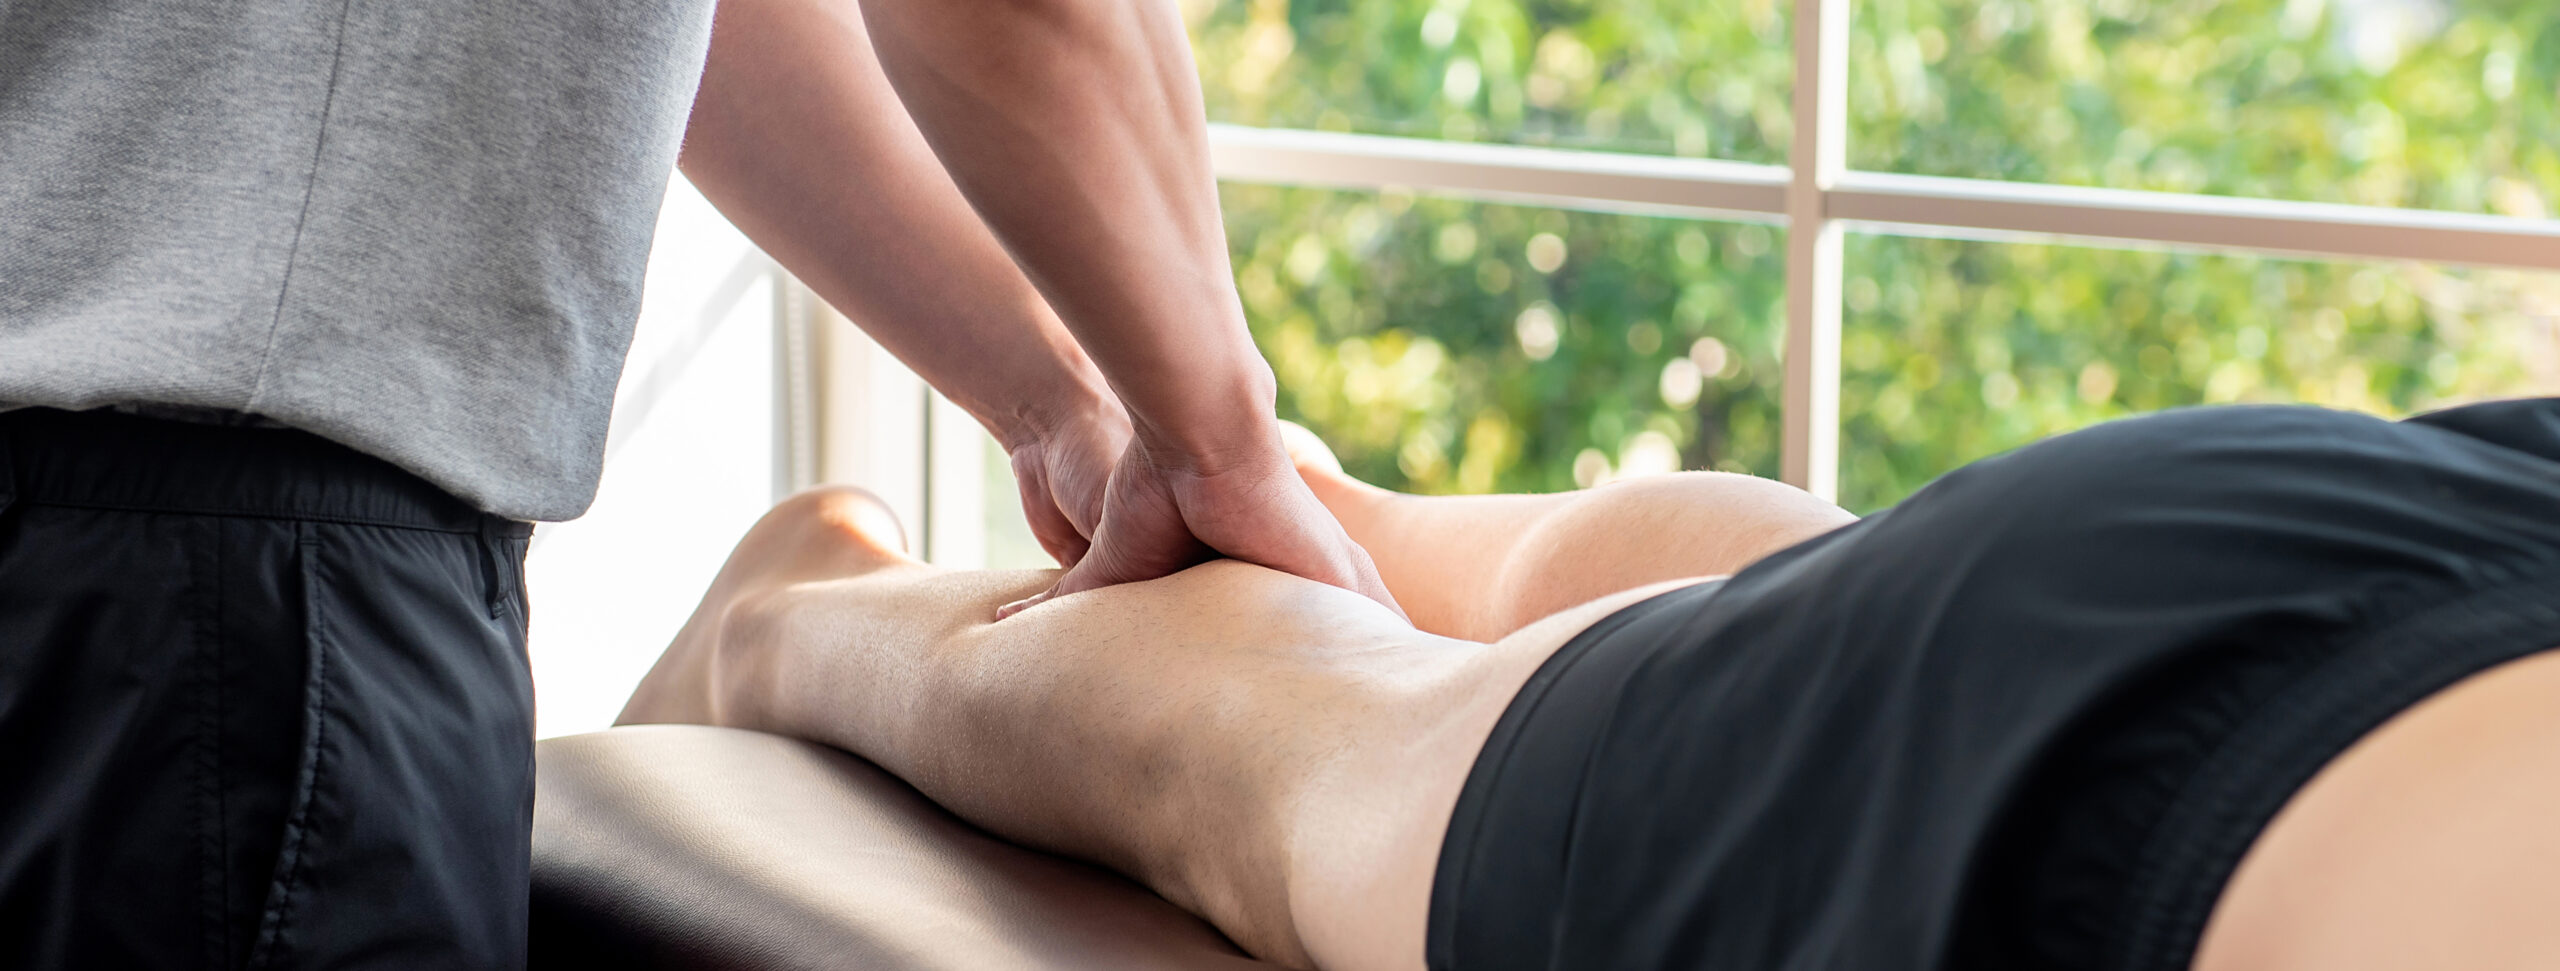 Treating severe muscle cramps, a man receives massage therapy on his calf.